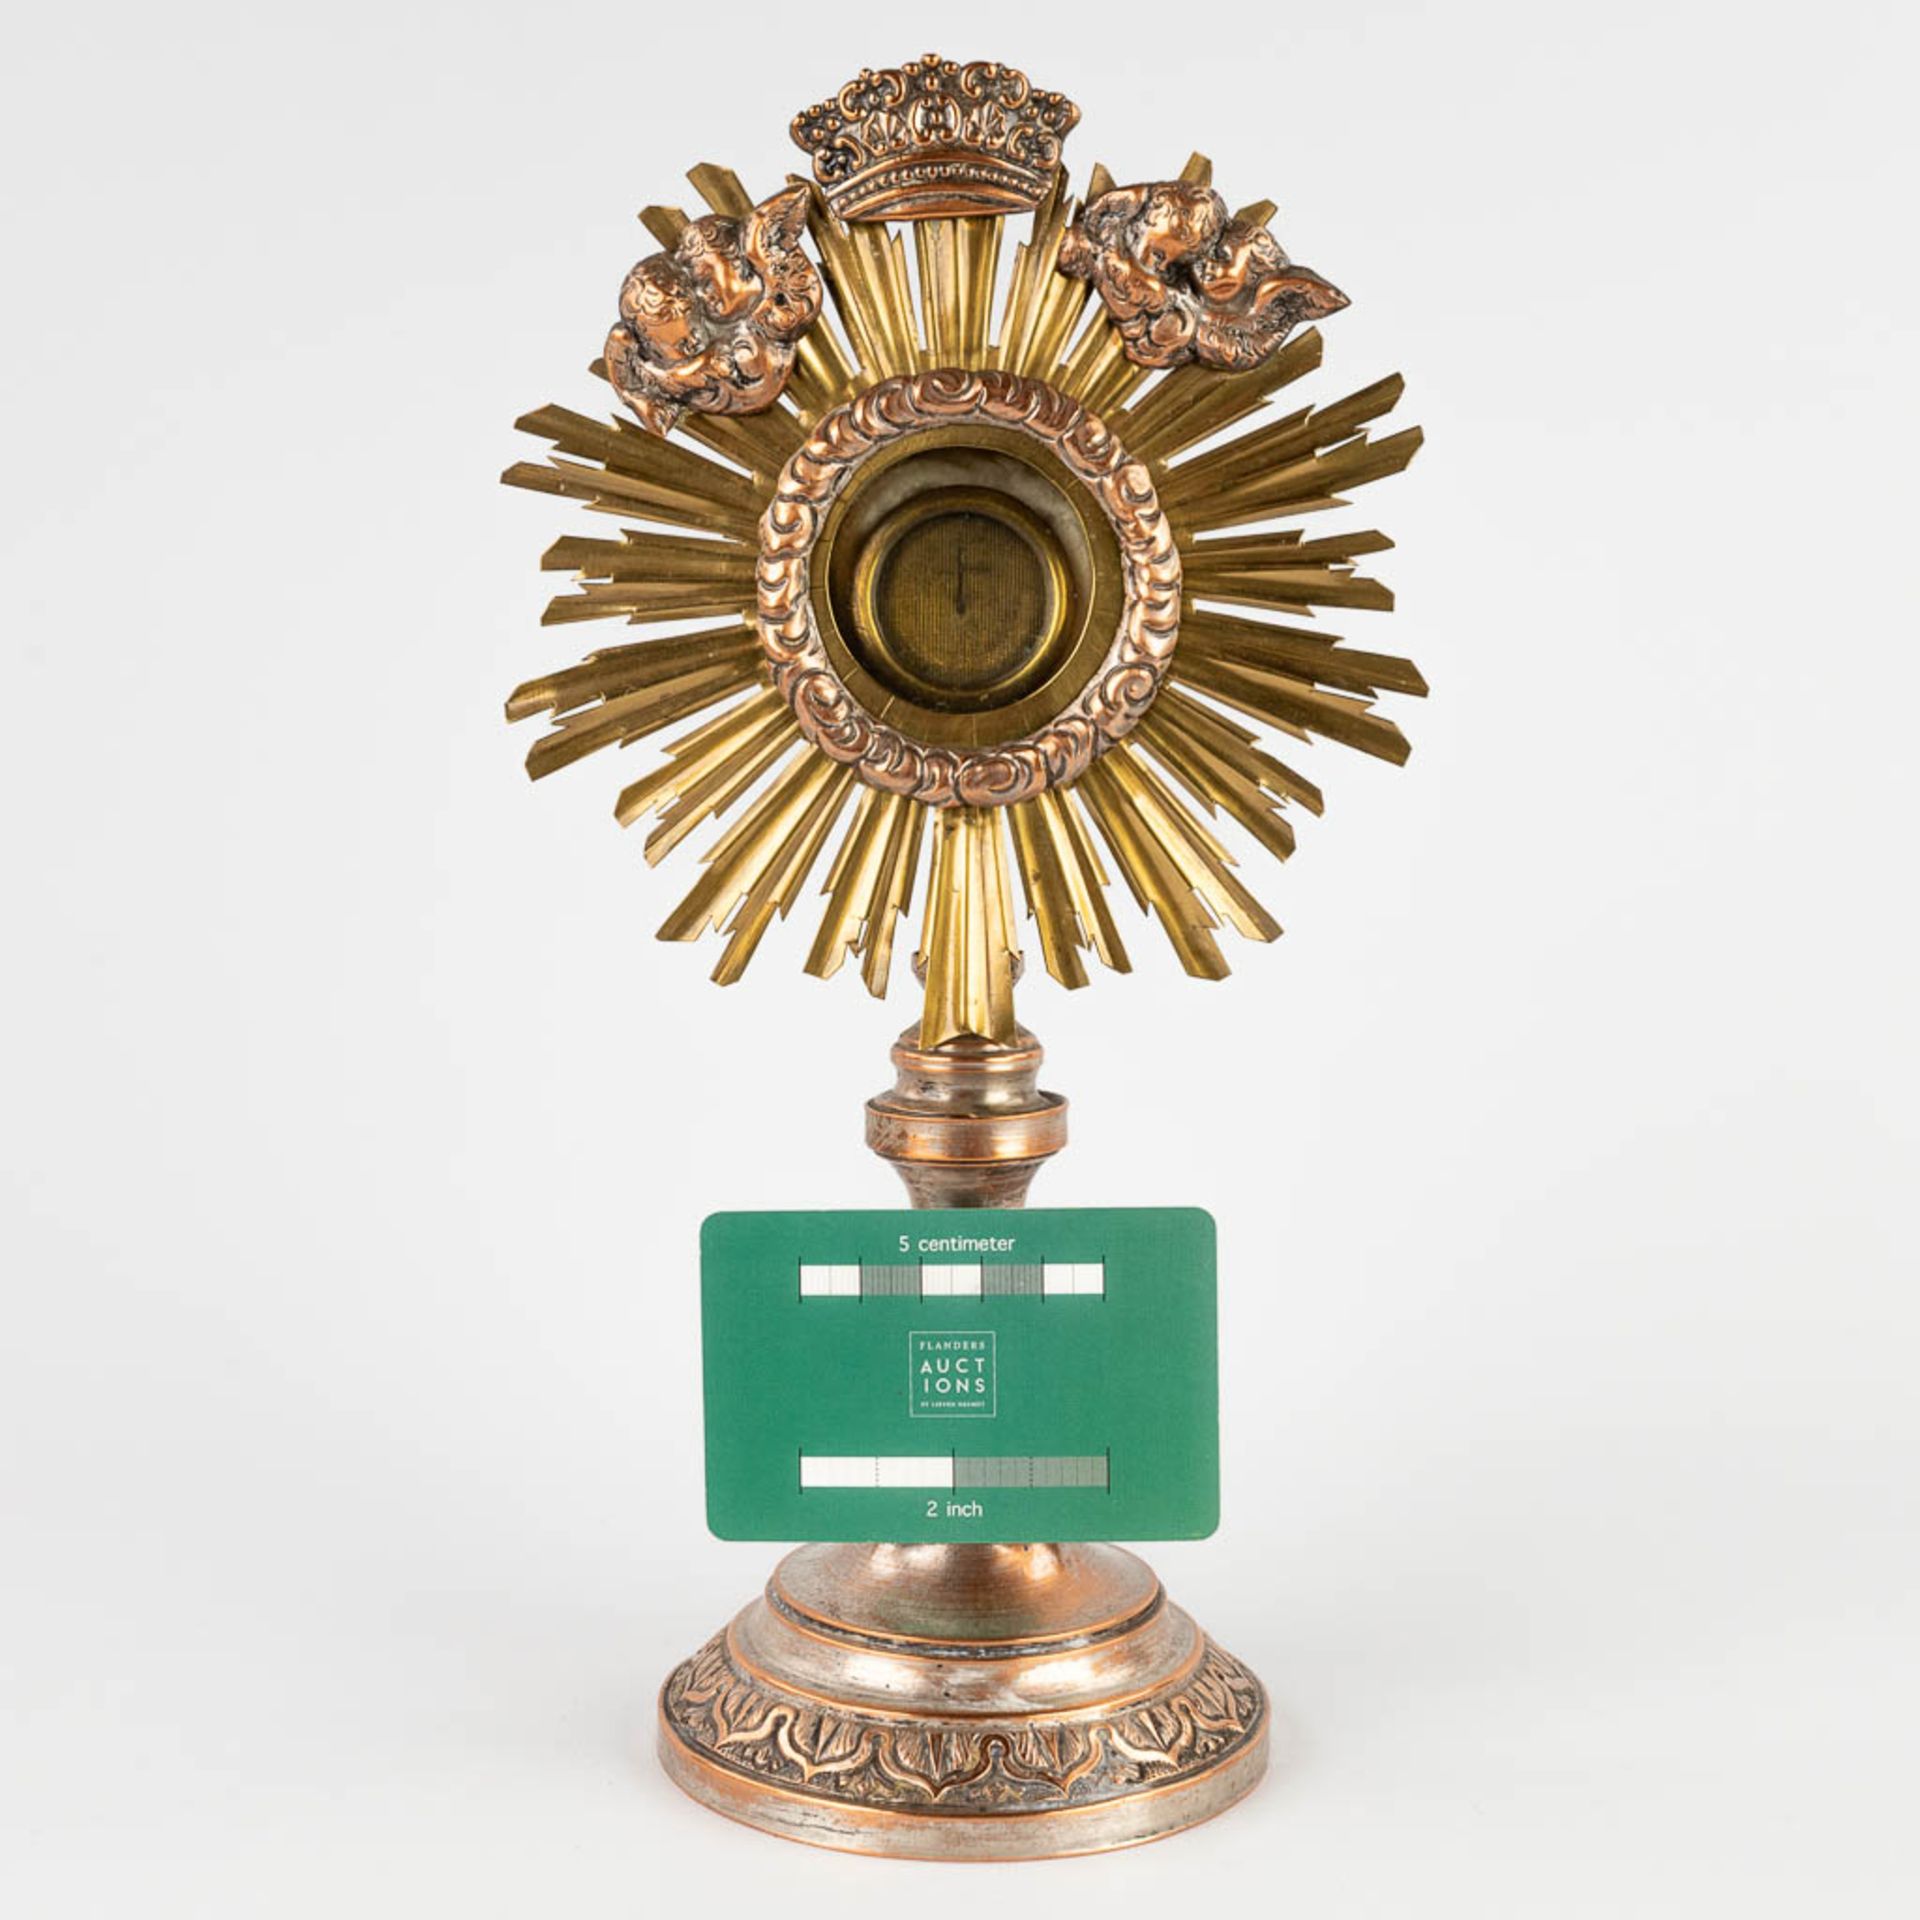 A small sunburst monstrance with a relic of the true cross. (D:11 x W:16 x H:29 cm) - Image 2 of 12